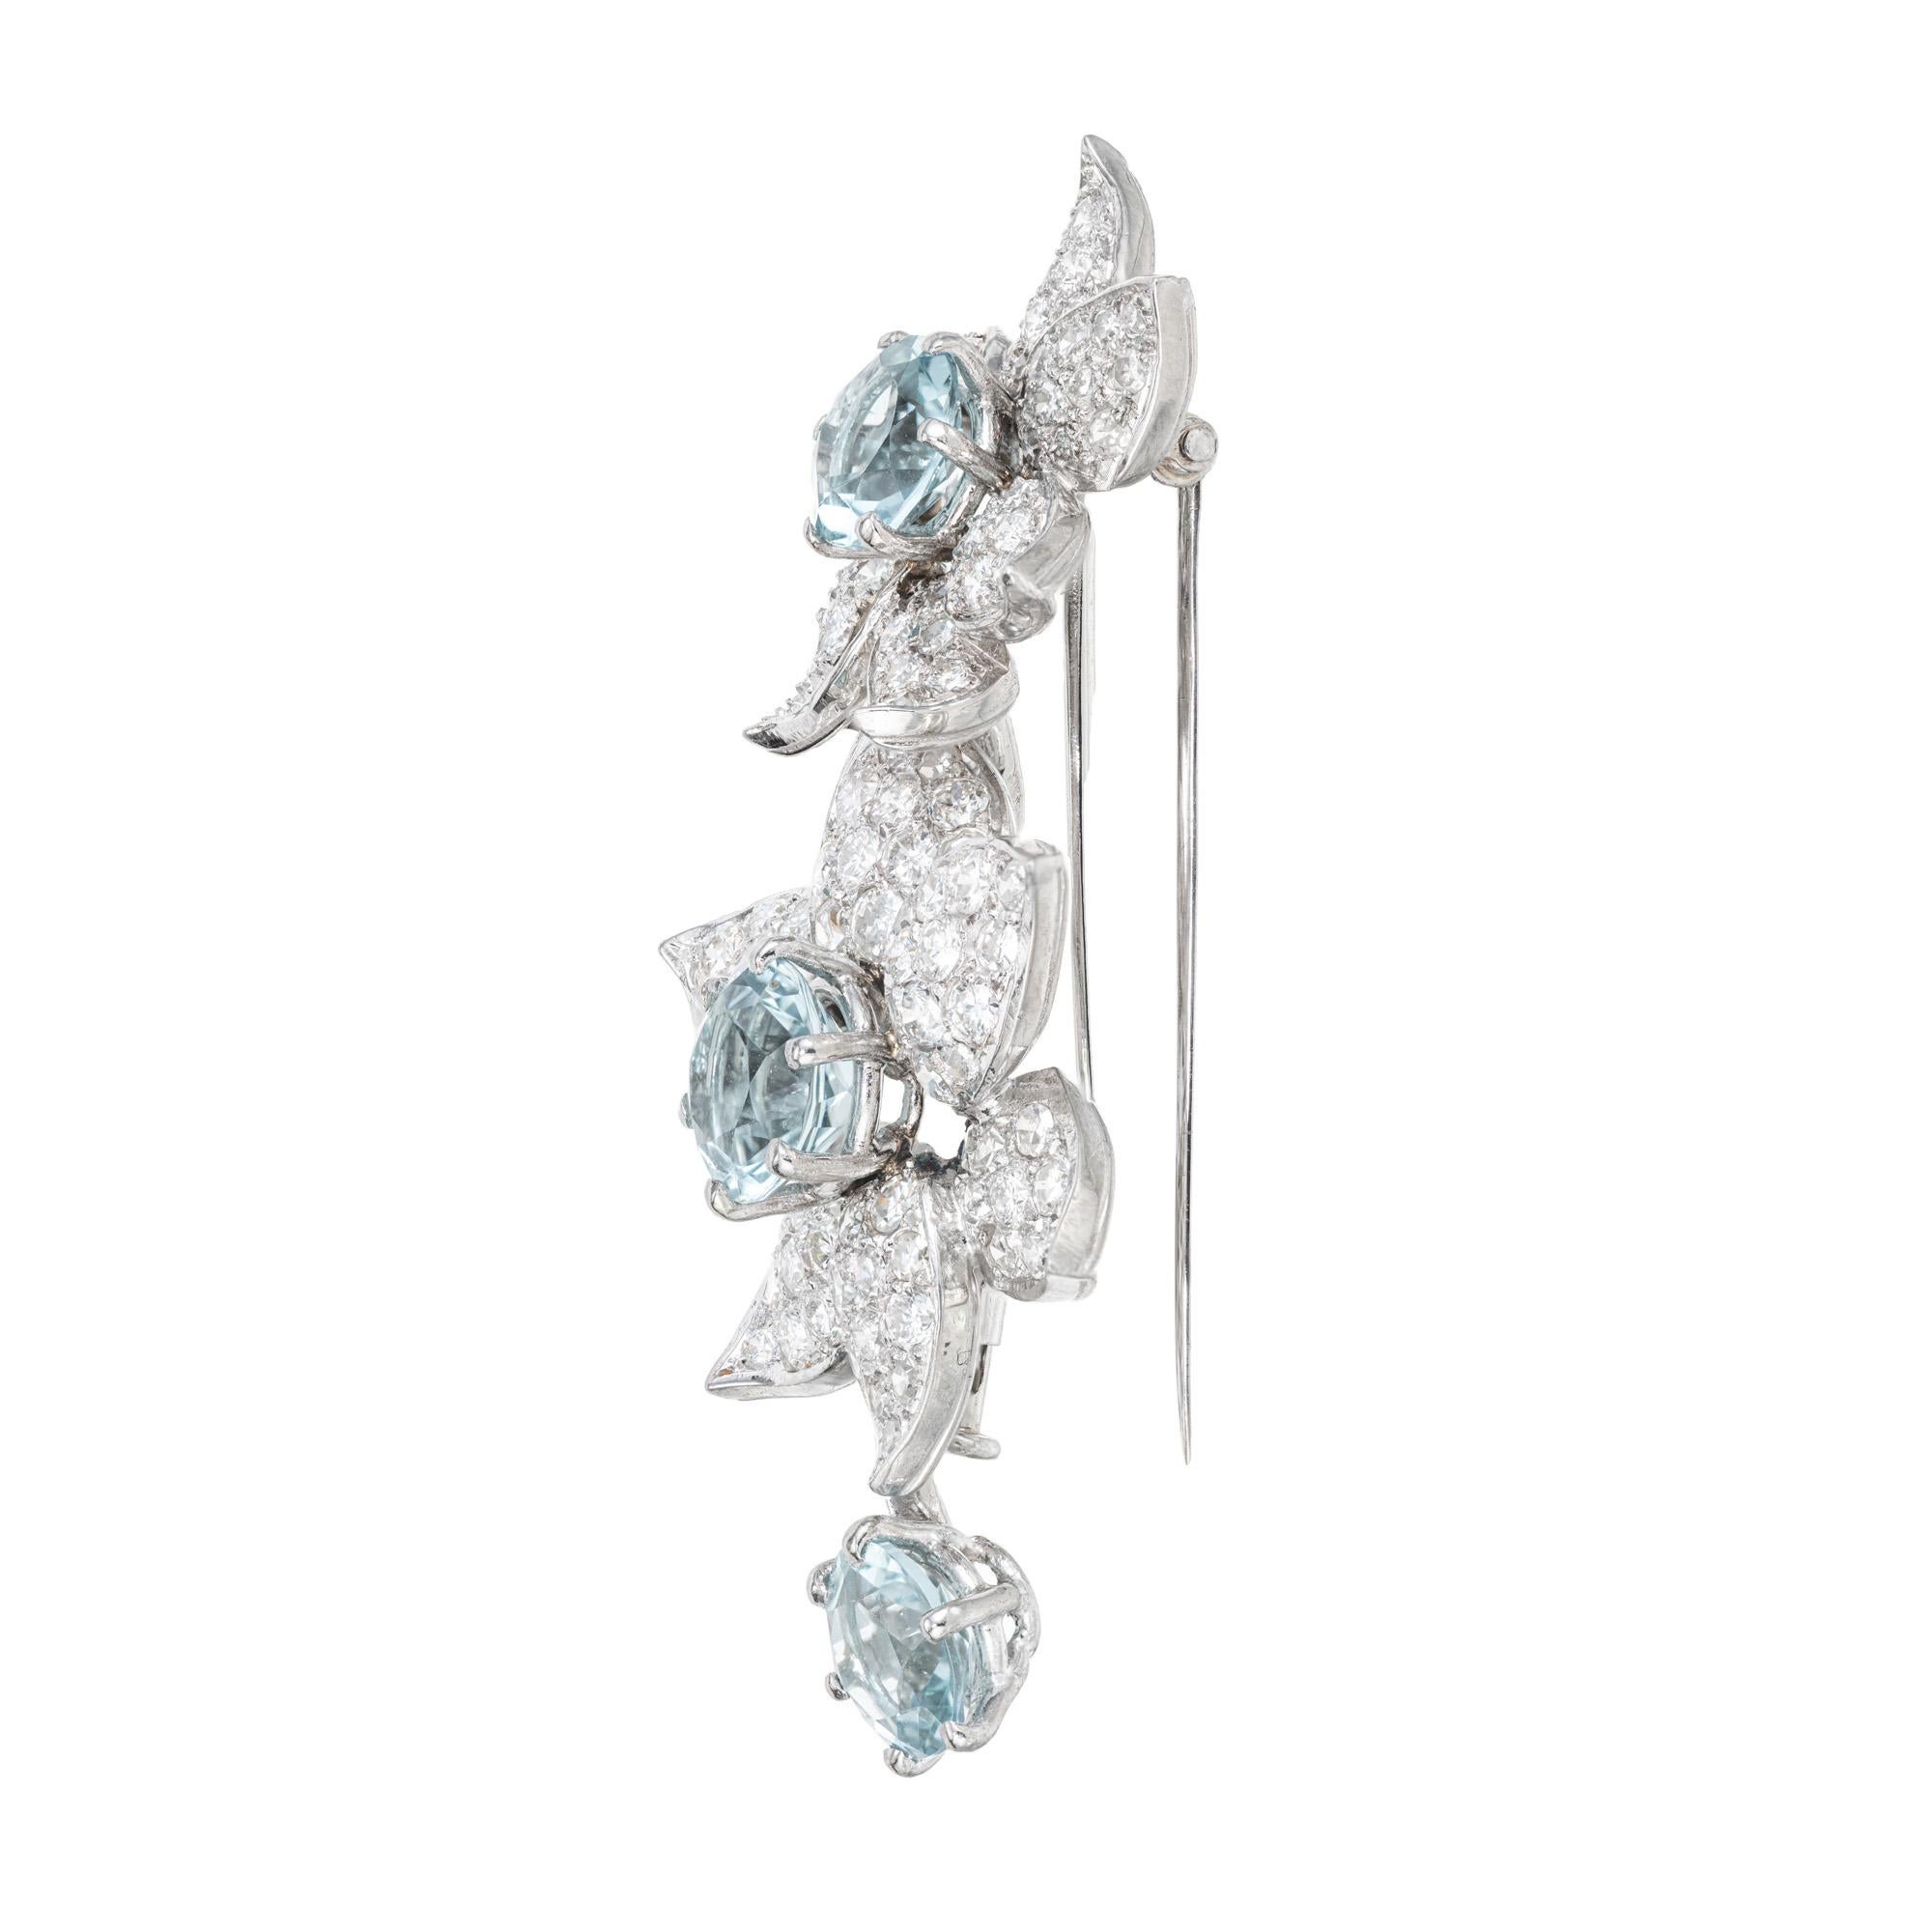 1940's Authentic Boucheron Paris diamond platinum flower brooch. 3 round aquamarines totaling 3.98cts, each with a flower design pave diamond set halo. Double pin stem for stability. 

Boucheron is a French premier luxury jewelry and watch house,